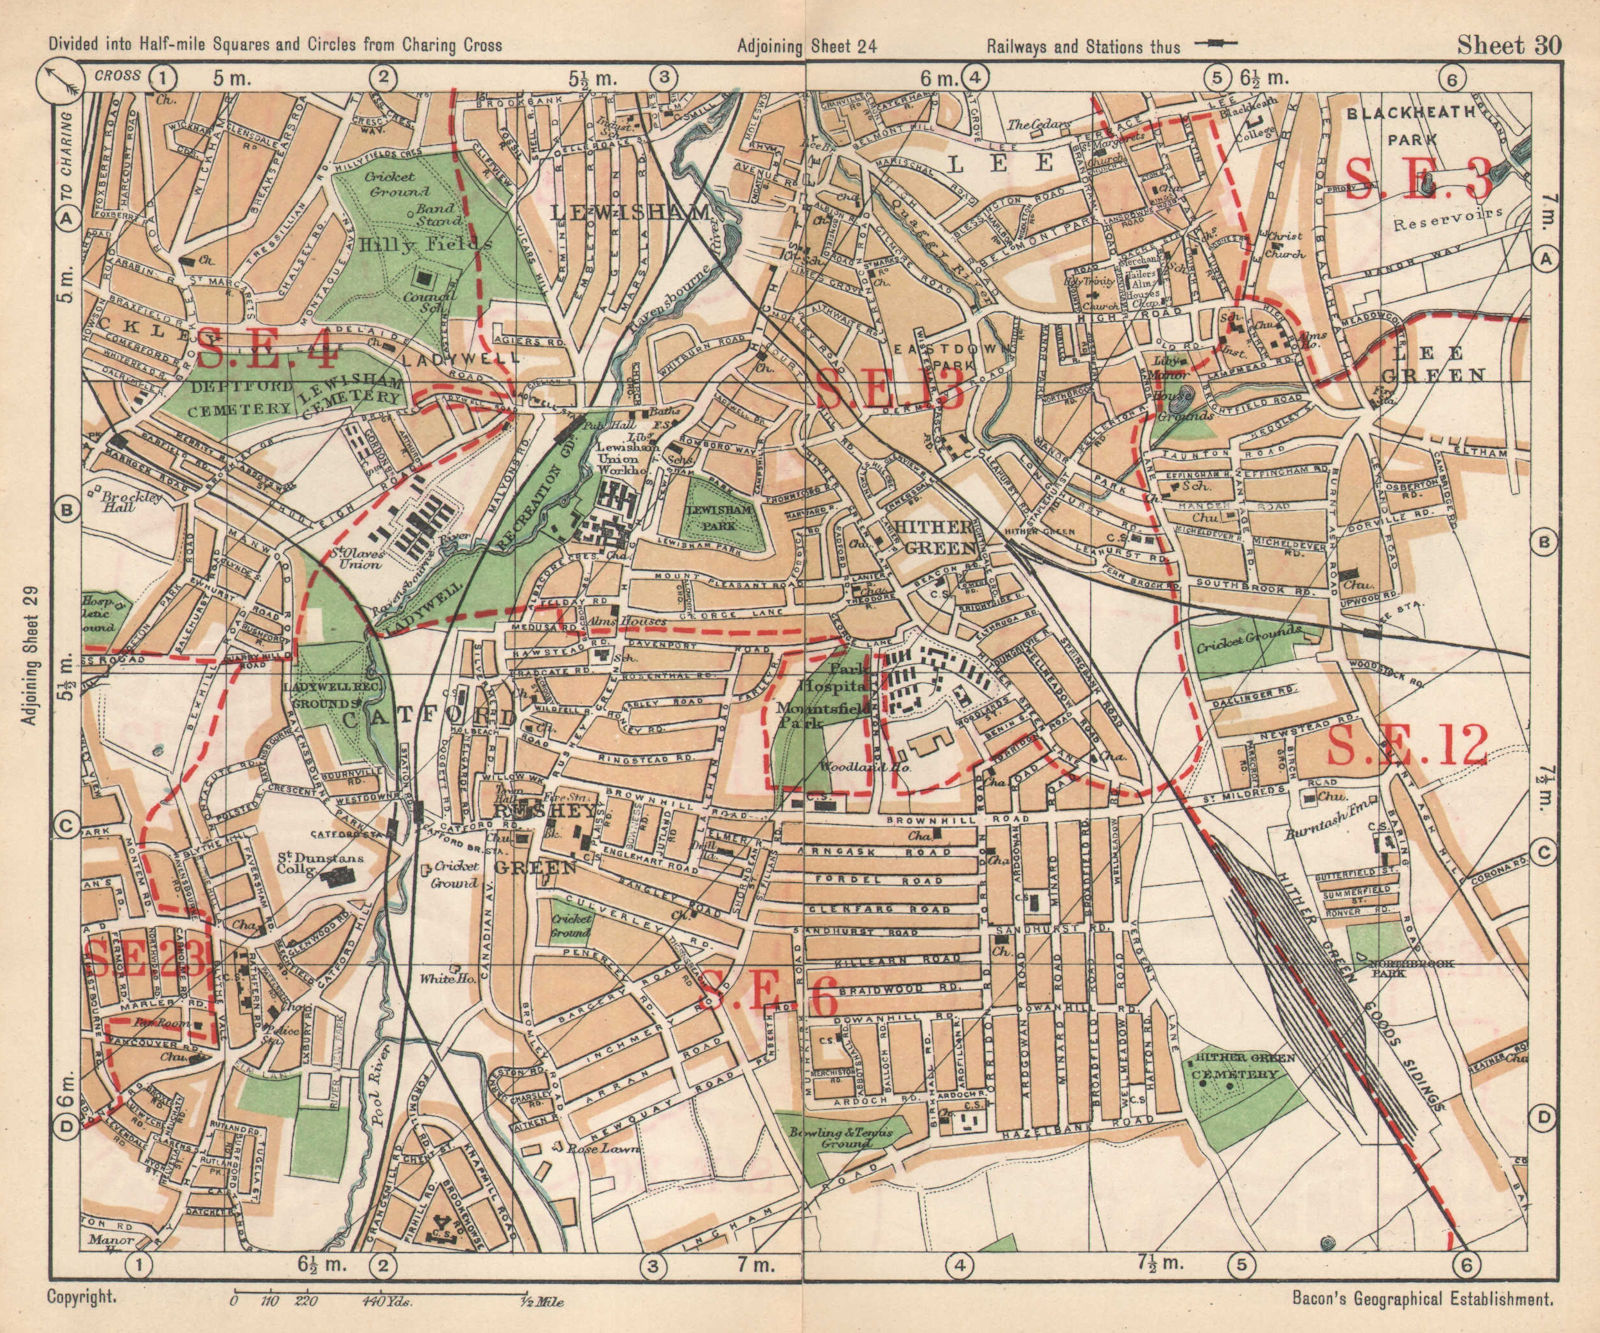 SE LONDON. Catford Hither/Rushey/Lee Green Lewisham Ladywell. BACON 1925 map